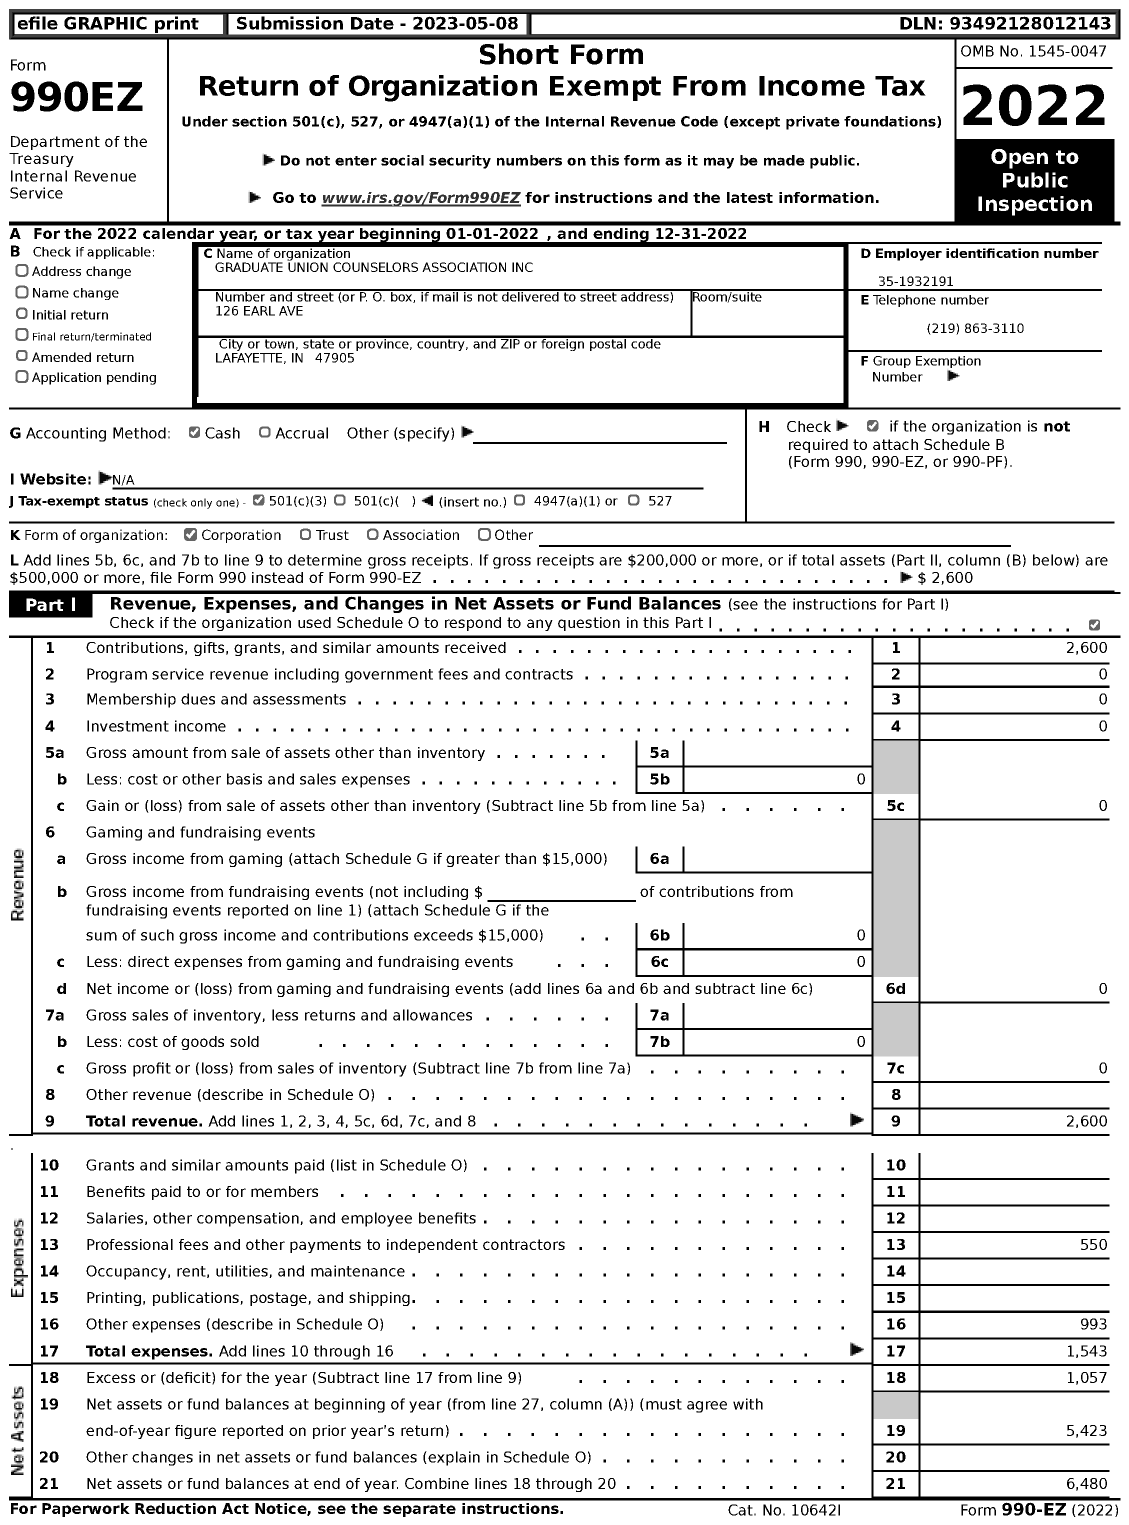 Image of first page of 2022 Form 990EZ for Graduate Union Counselors Association